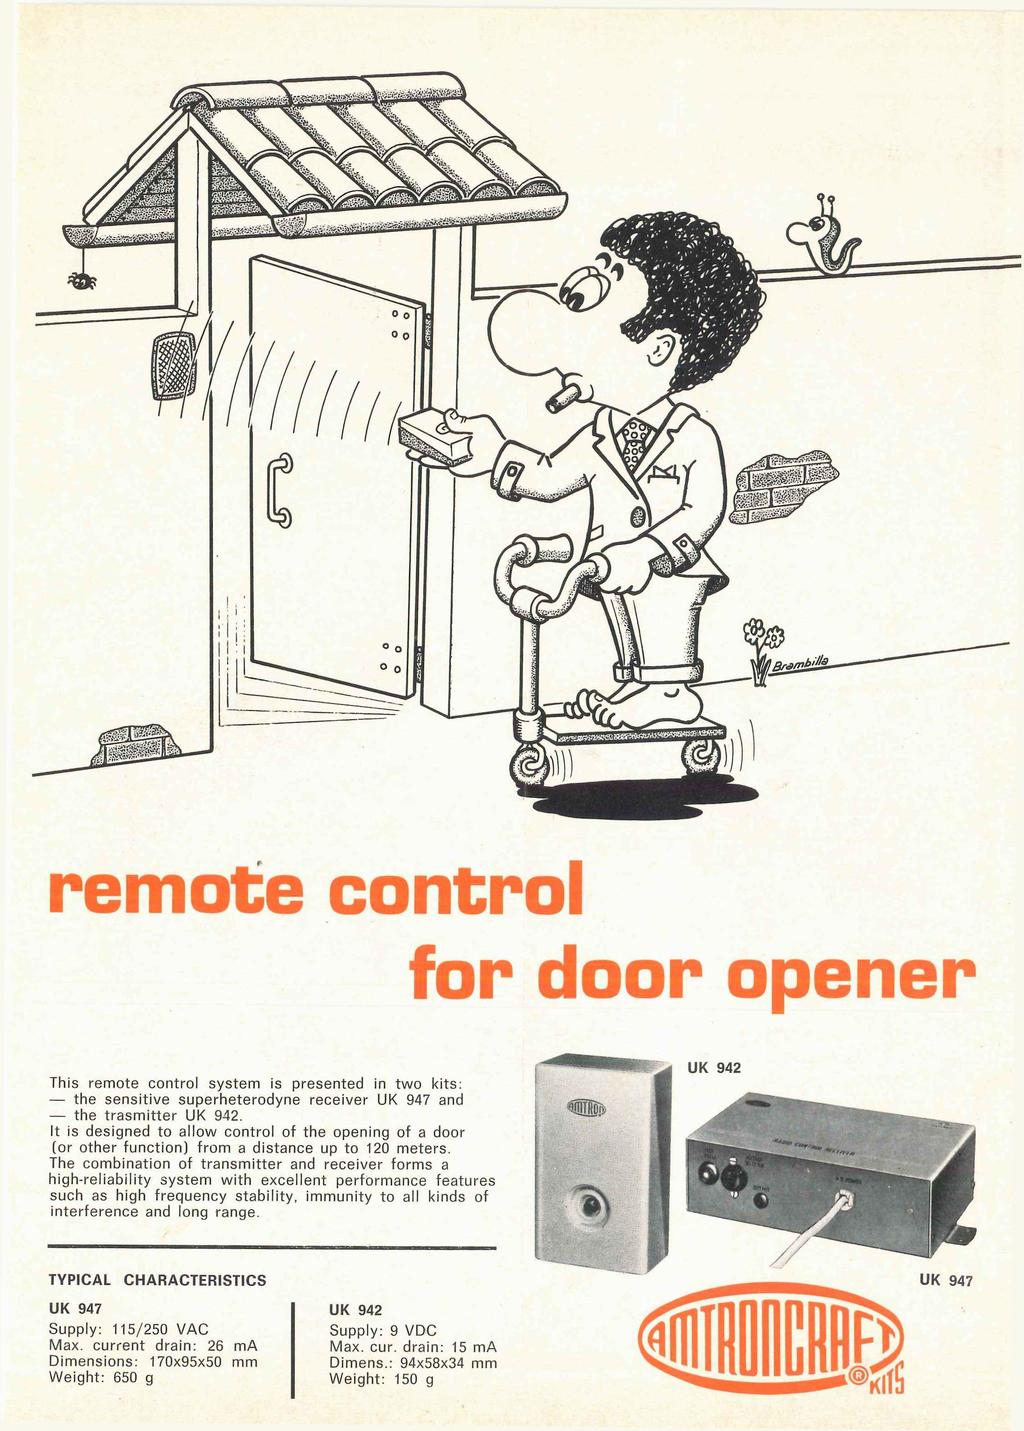 remote control for door opener This remote control system is presented in two kits: the sensitive superheterodyne receiver UK 947 and the trasmitter UK 942.